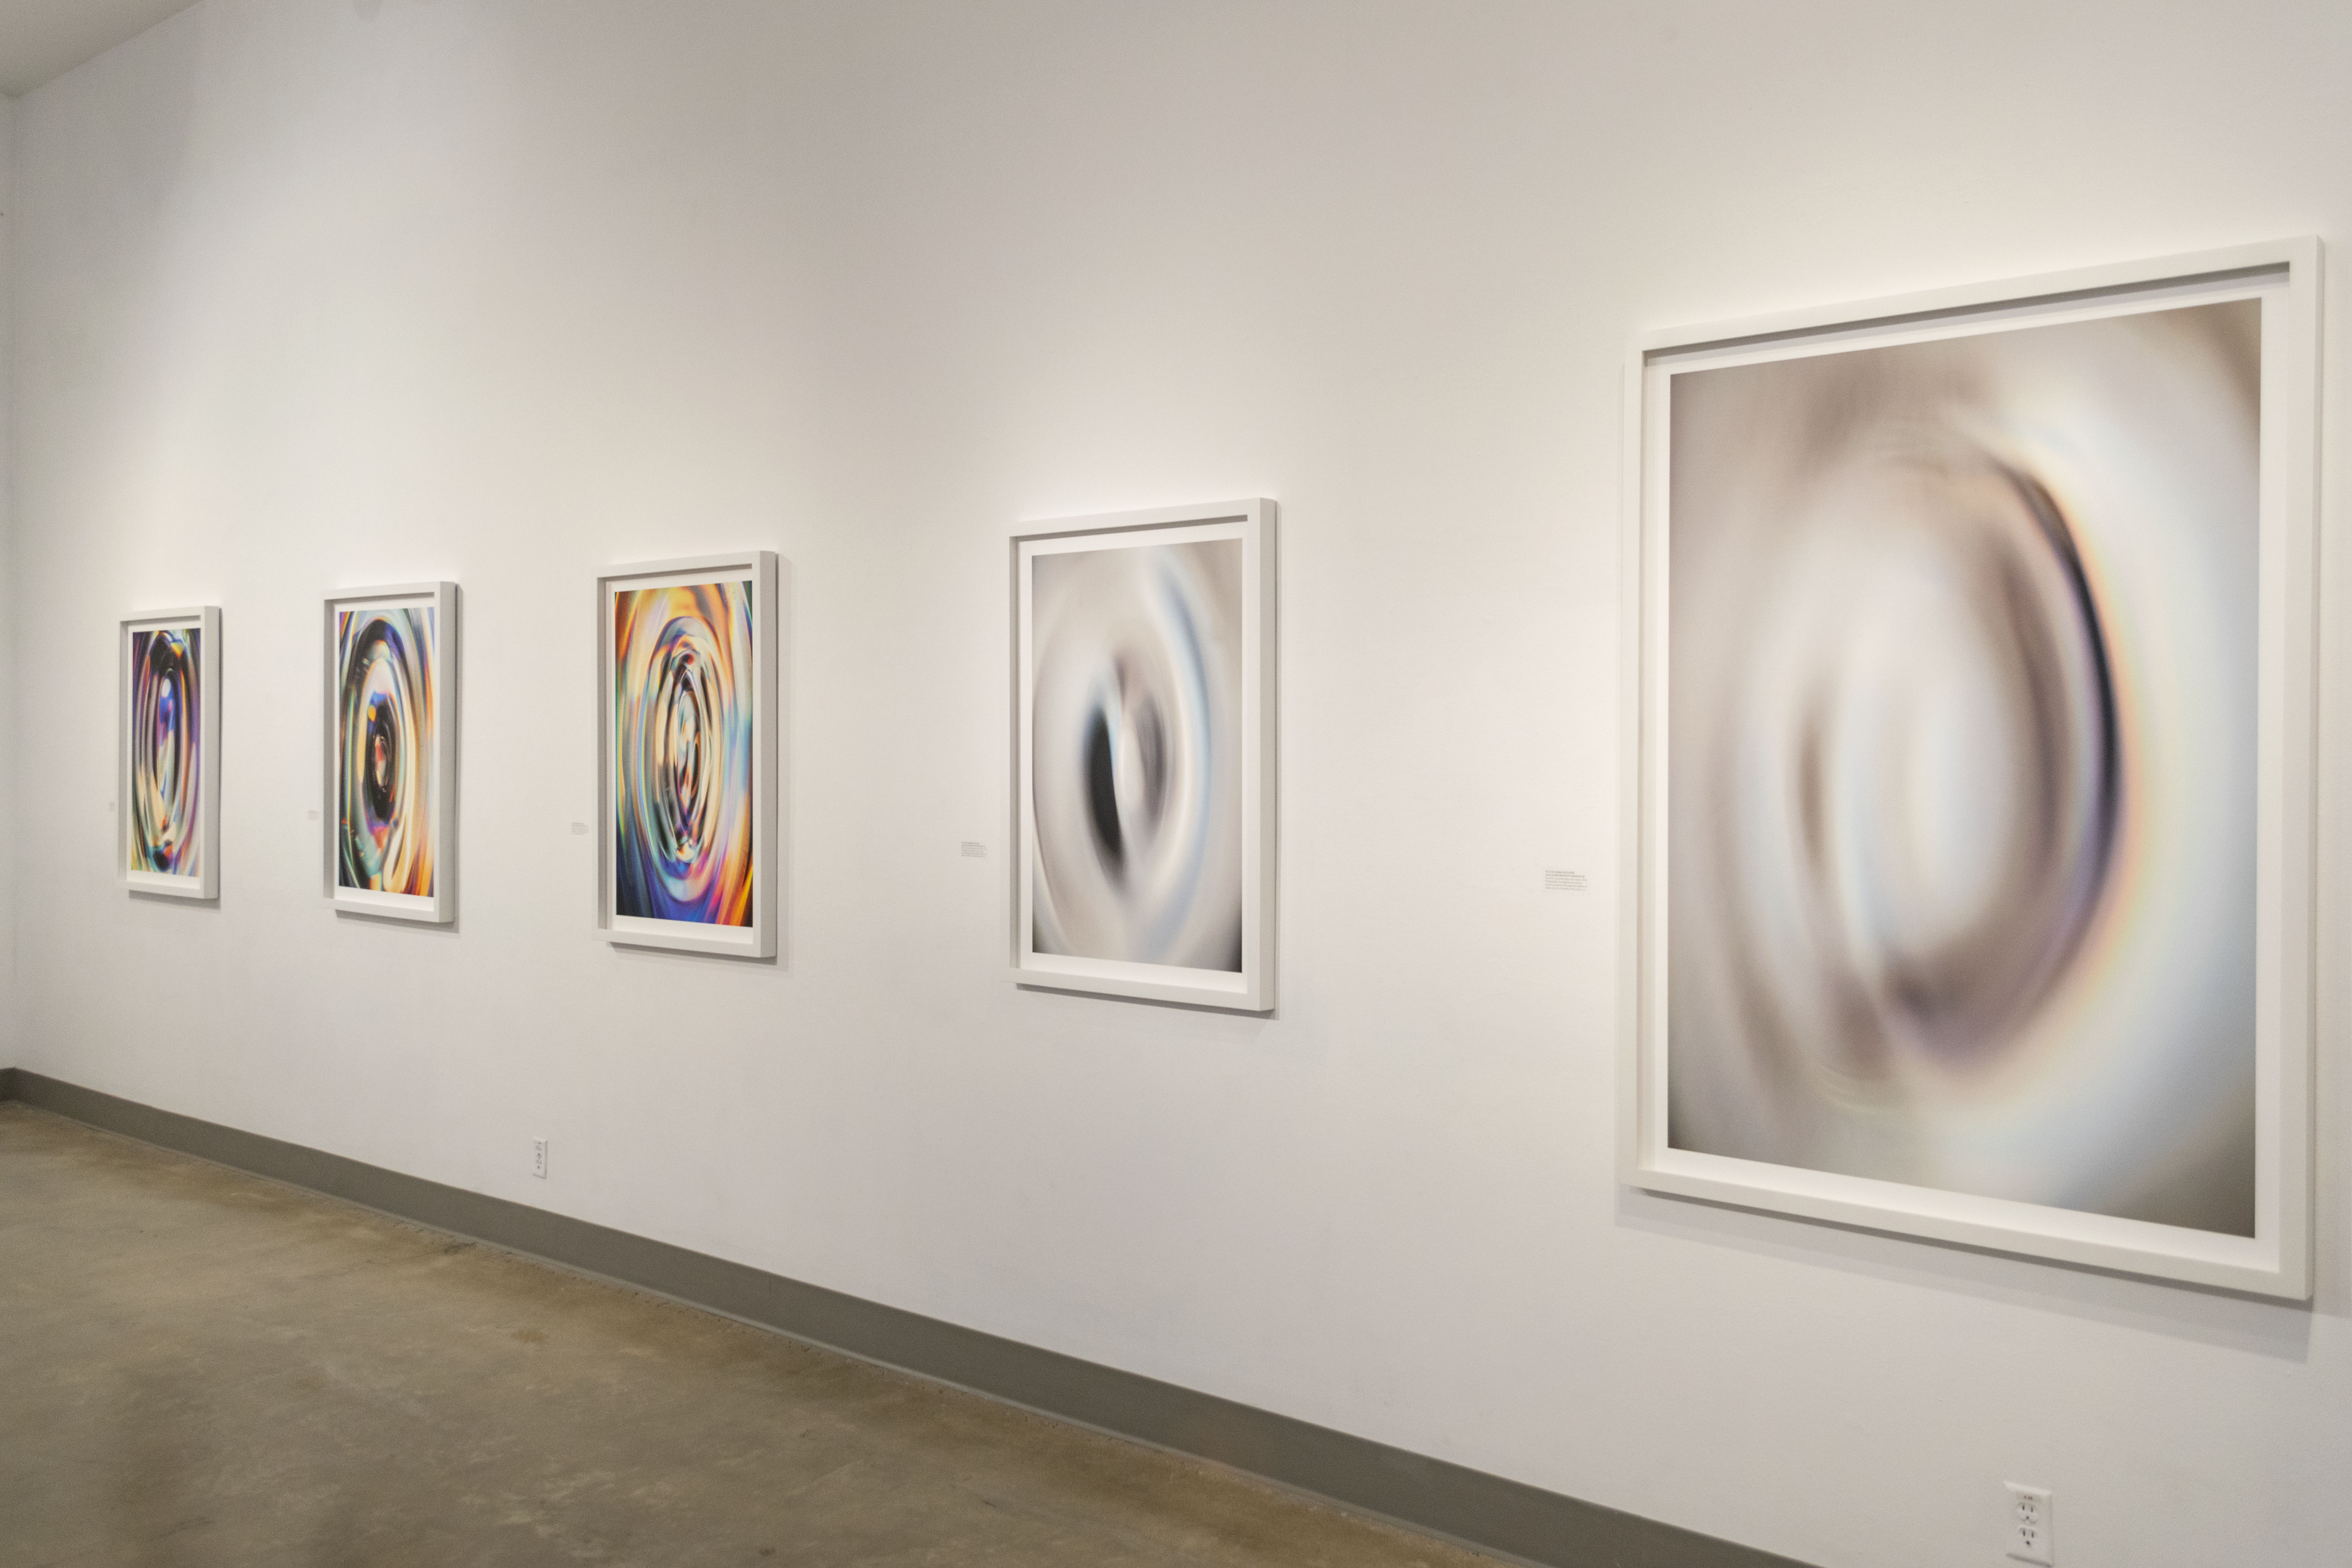 Eastside of gallery, Exhibition: Sasha vom Dorp: 15.15 Hz, Aug. 23 - Oct. 18, 2018, Curator: Michele Cairella Fillmore, W. Keith & Janet Kellogg Art Gallery, Cal Poly Pomona. [Artist Sasha vom Dorp captures the interaction of light, sound and water in high-speed photography (Photo Credit: William W. Gunn)]